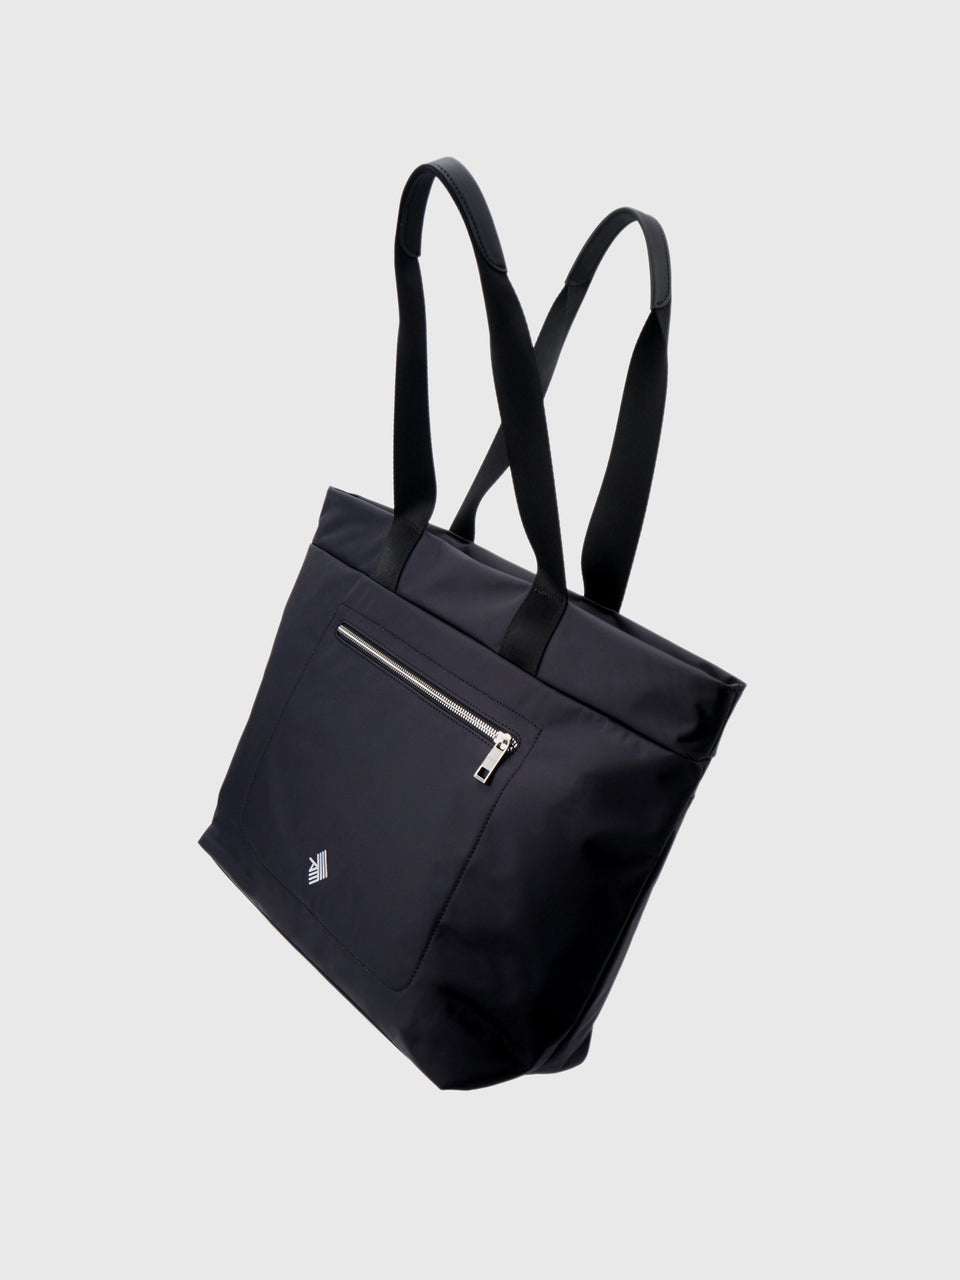 Carry-All Tote Bag - Noir Anthracite